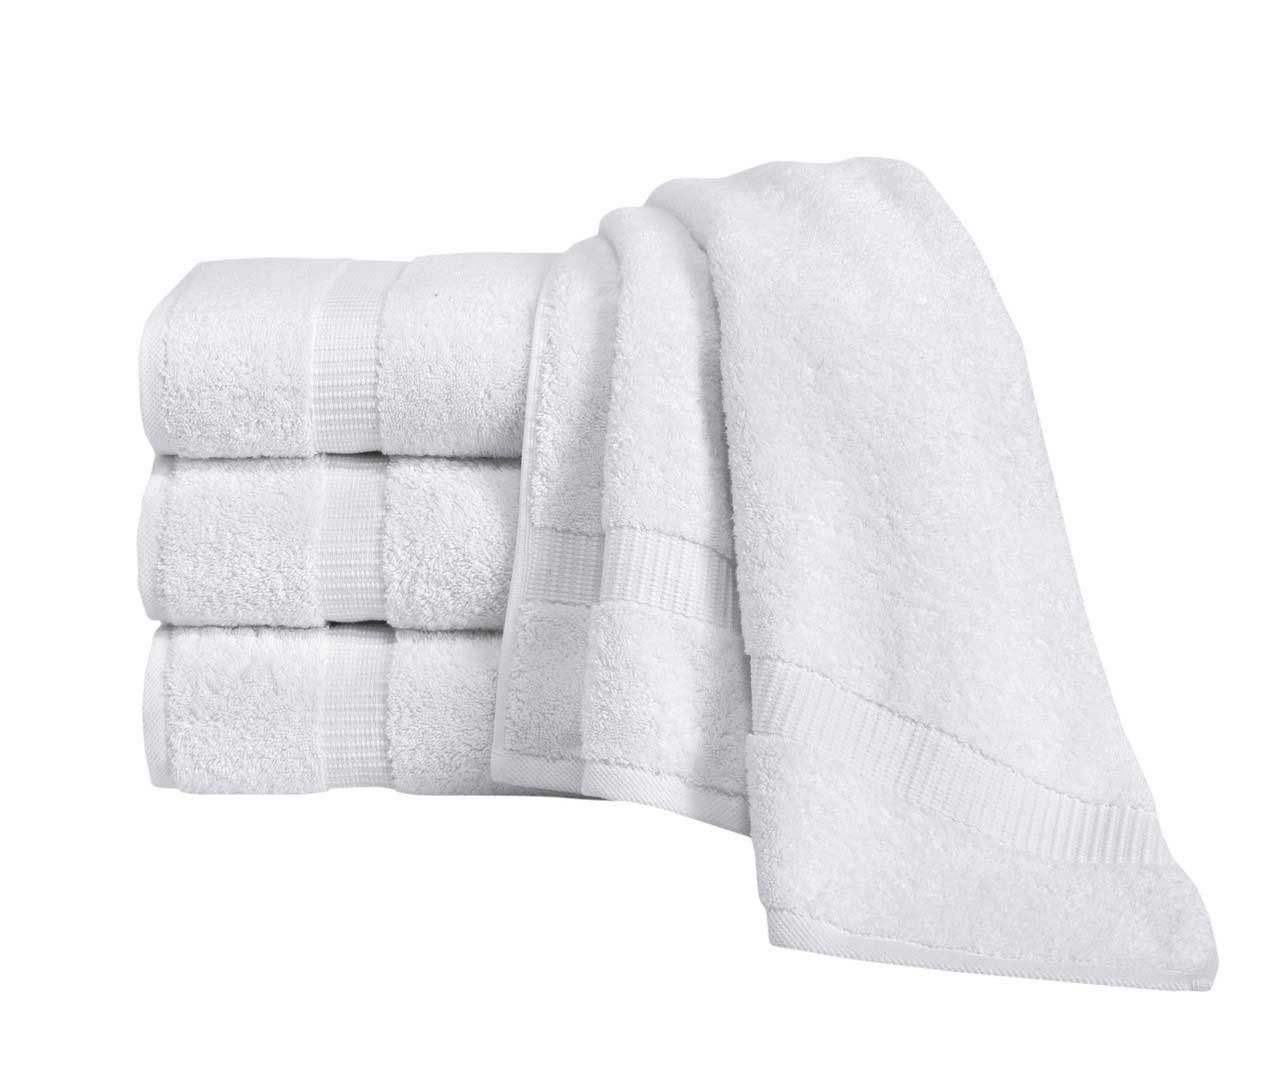 How can you tell a quality Turkish towel?